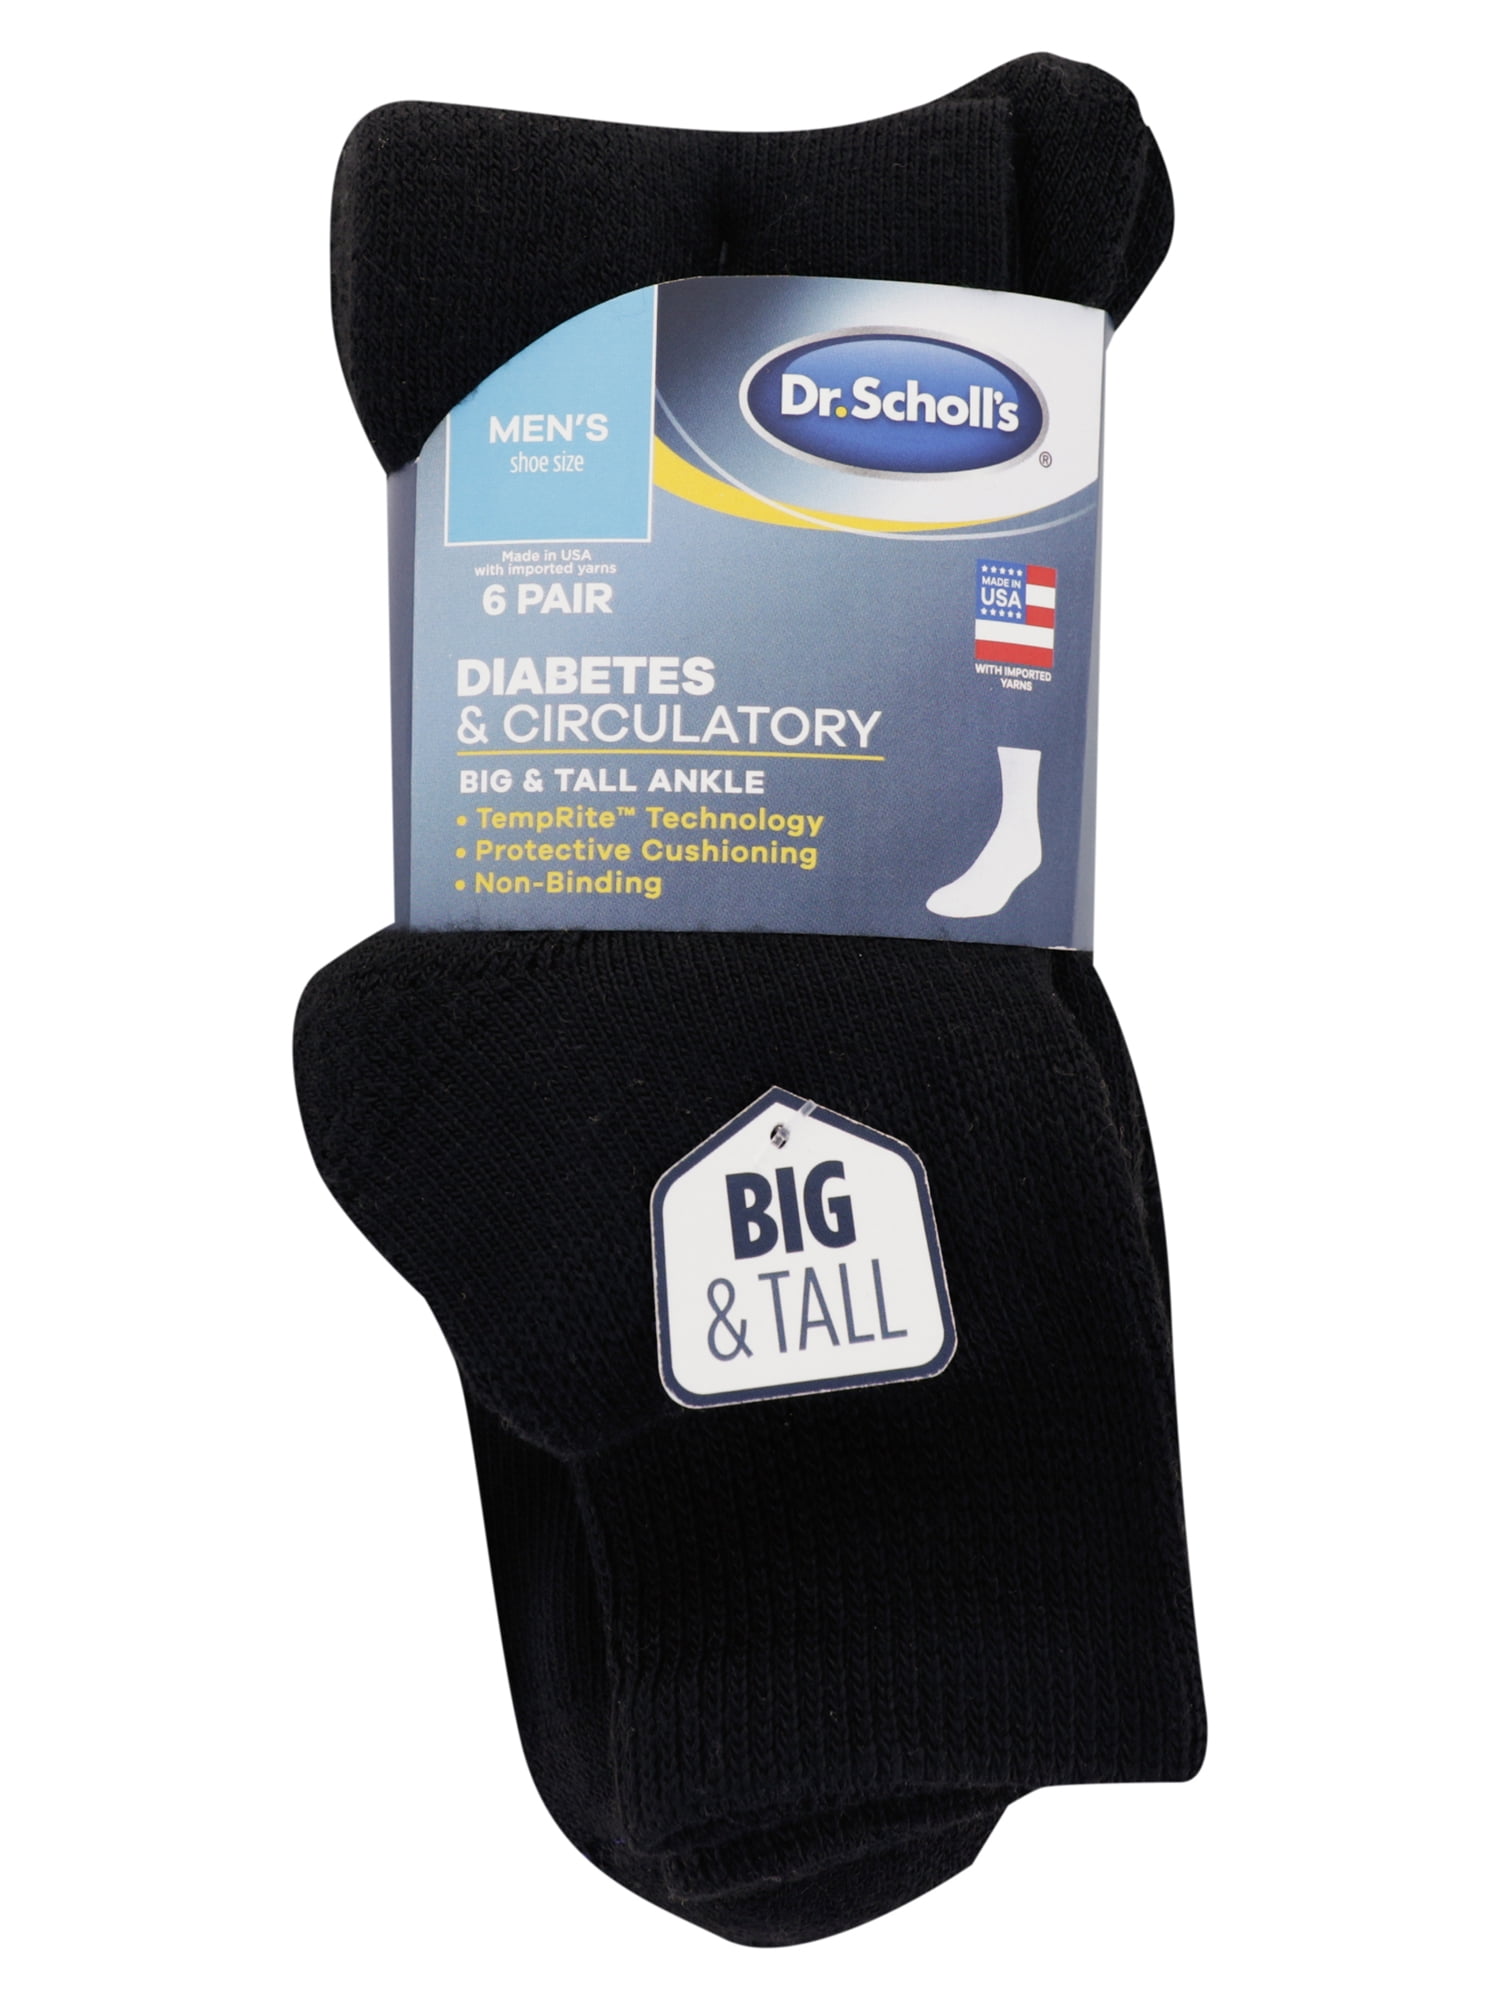 Dr. Scholl's Men's Big and Tall Diabetes & Circulatory Ankle Socks, 6 Pack